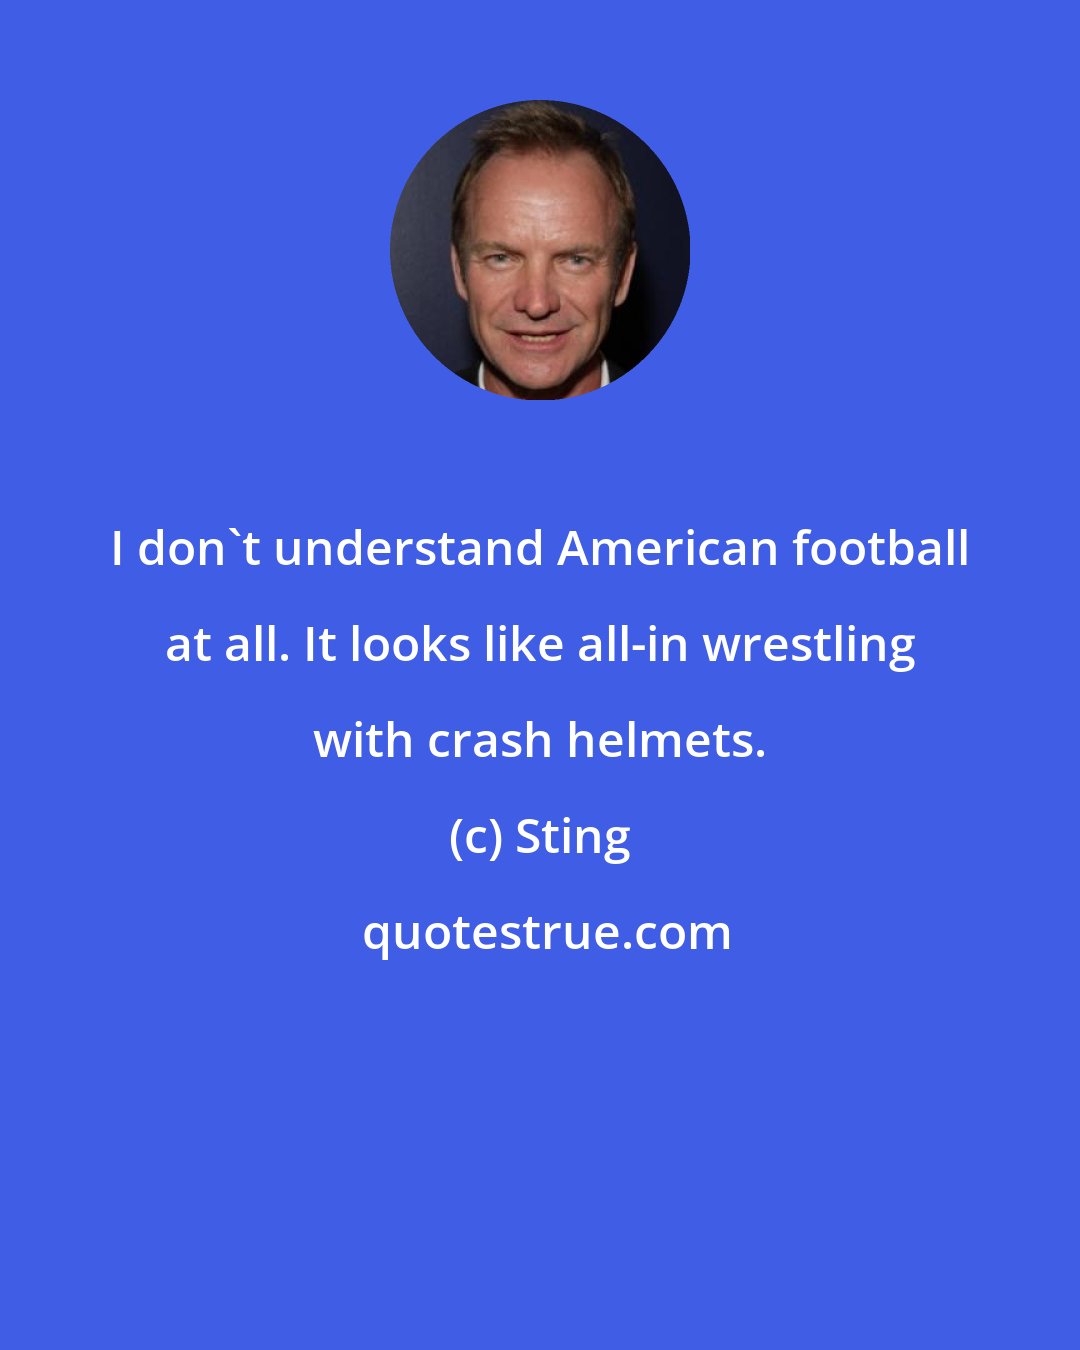 Sting: I don't understand American football at all. It looks like all-in wrestling with crash helmets.